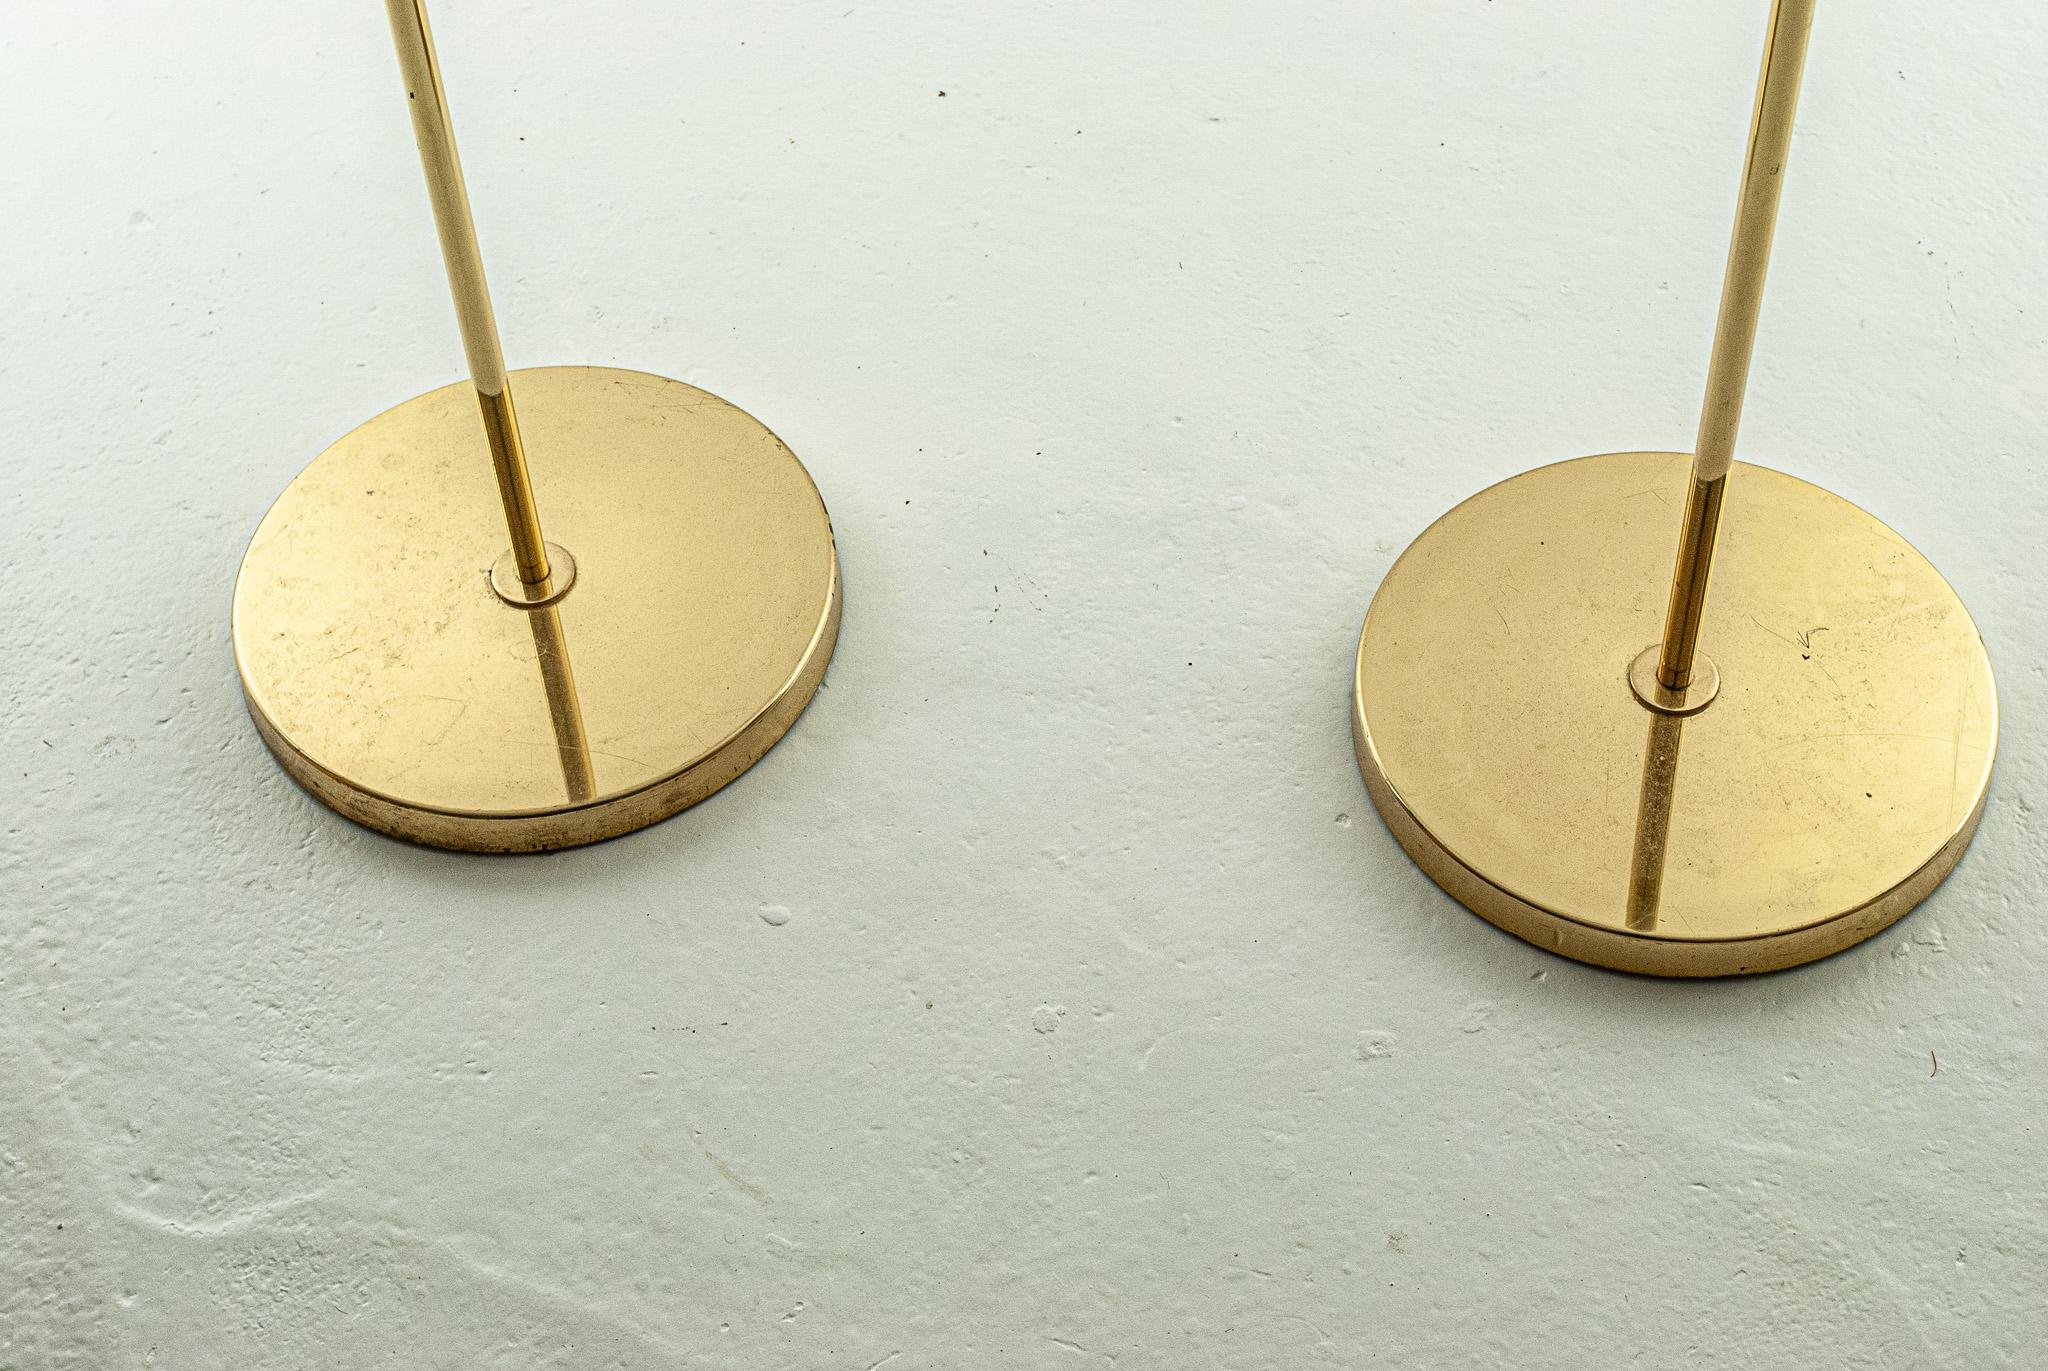 Pair of floor lamps in brass and lacquered metal produced by Hans-Agne Jakobsson, Markaryd, Sweden, 1970s. Very good condition.